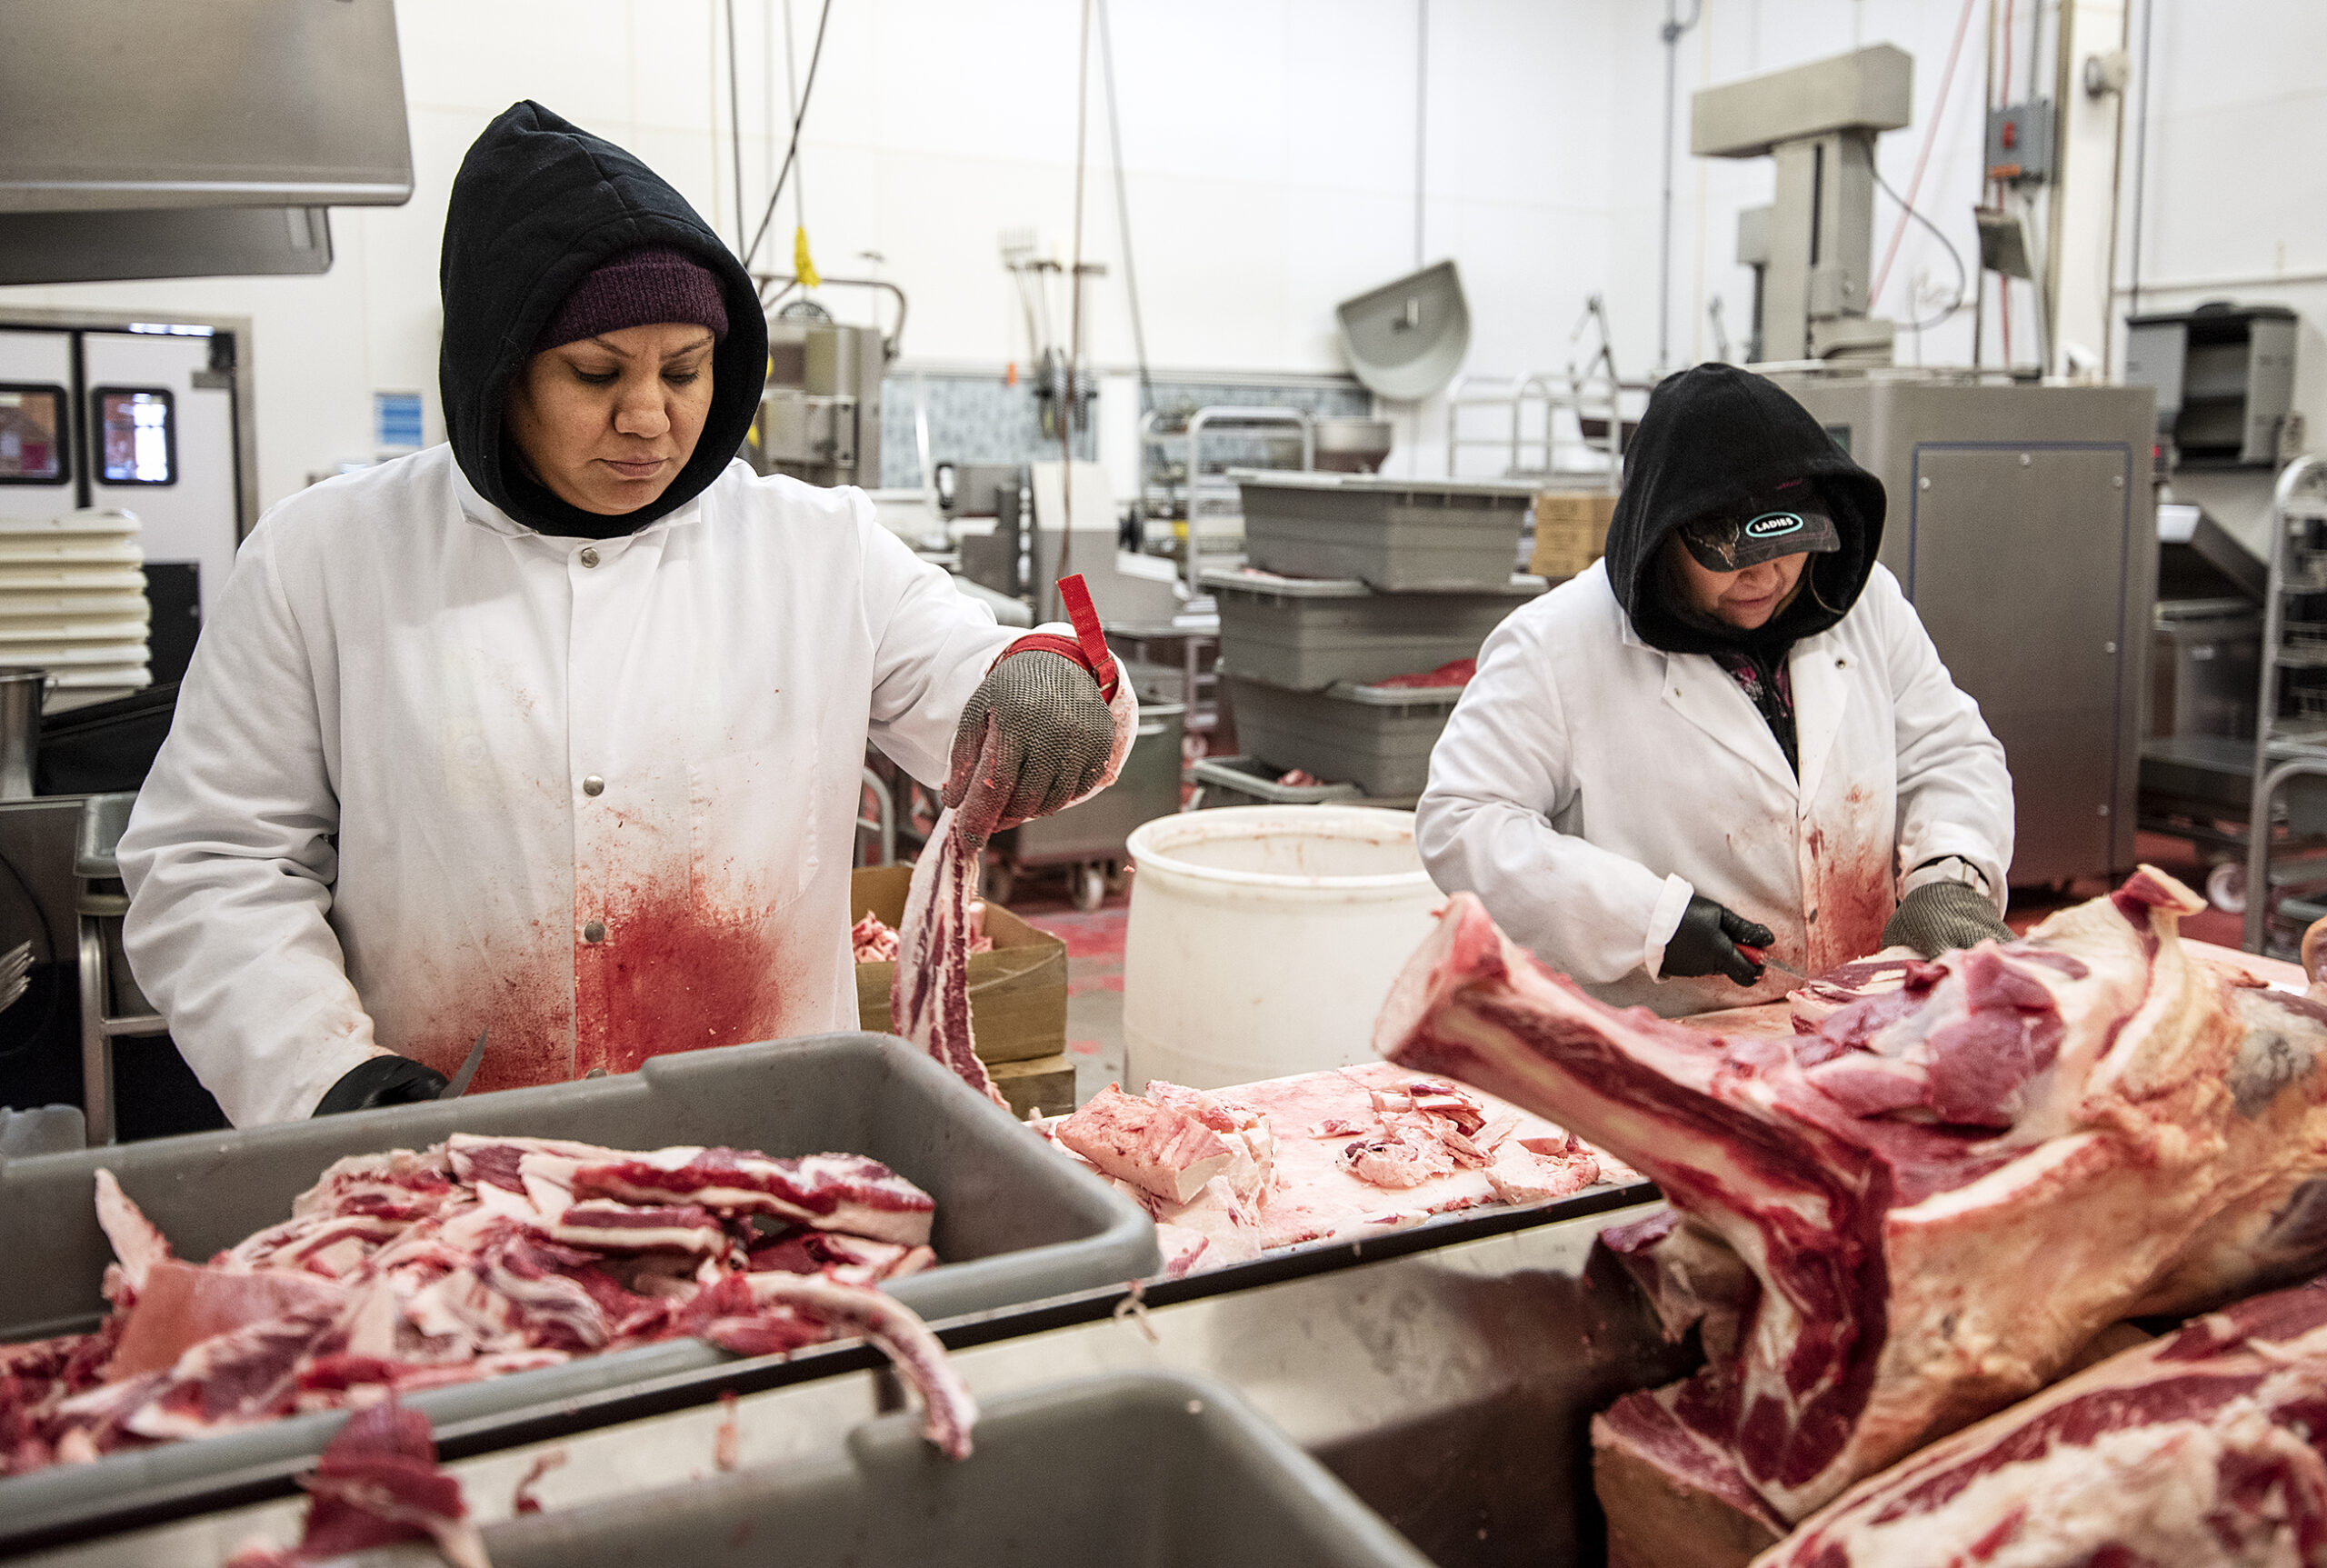 Making the cut: Meat processors and others seek state support for more workers and inspectors